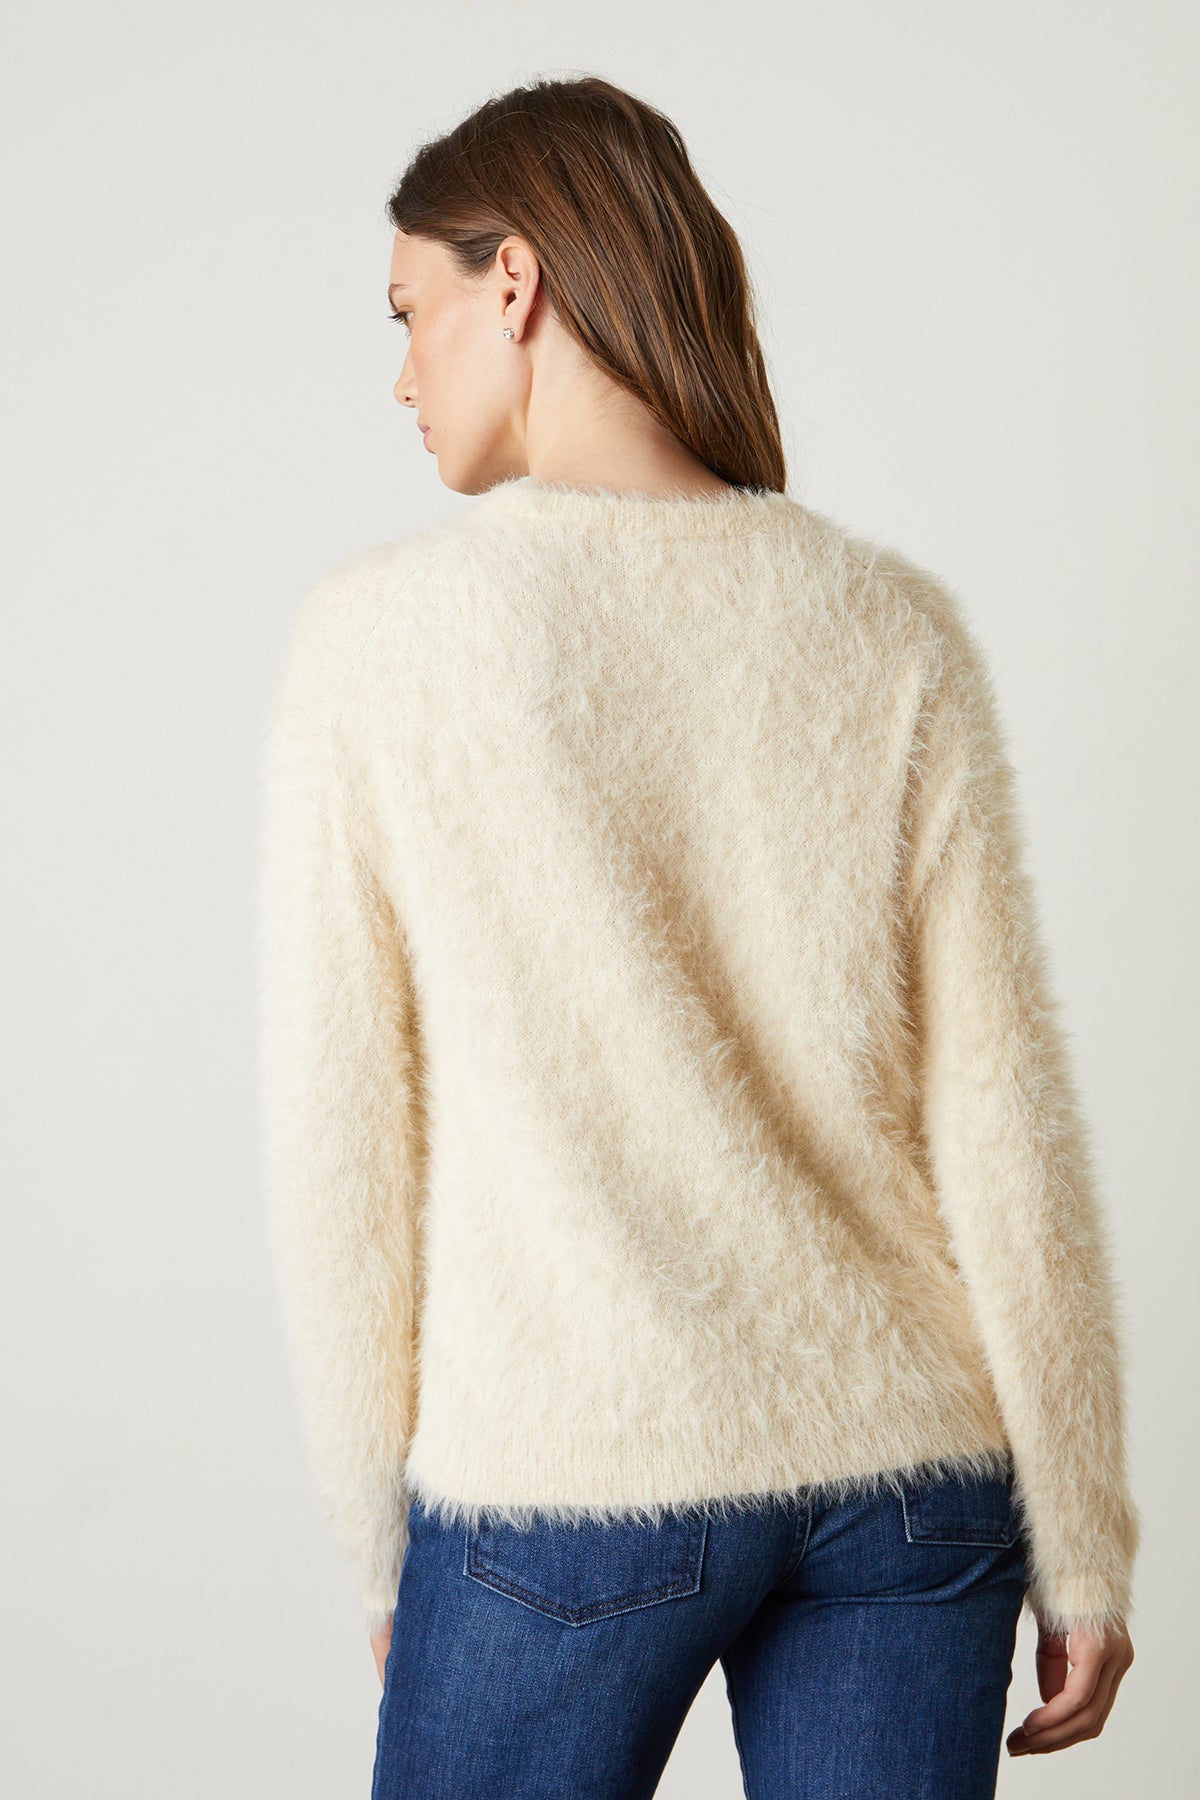 Ray Feather Yarn Crew Neck Sweater in milk back with blue denim-25444375953601